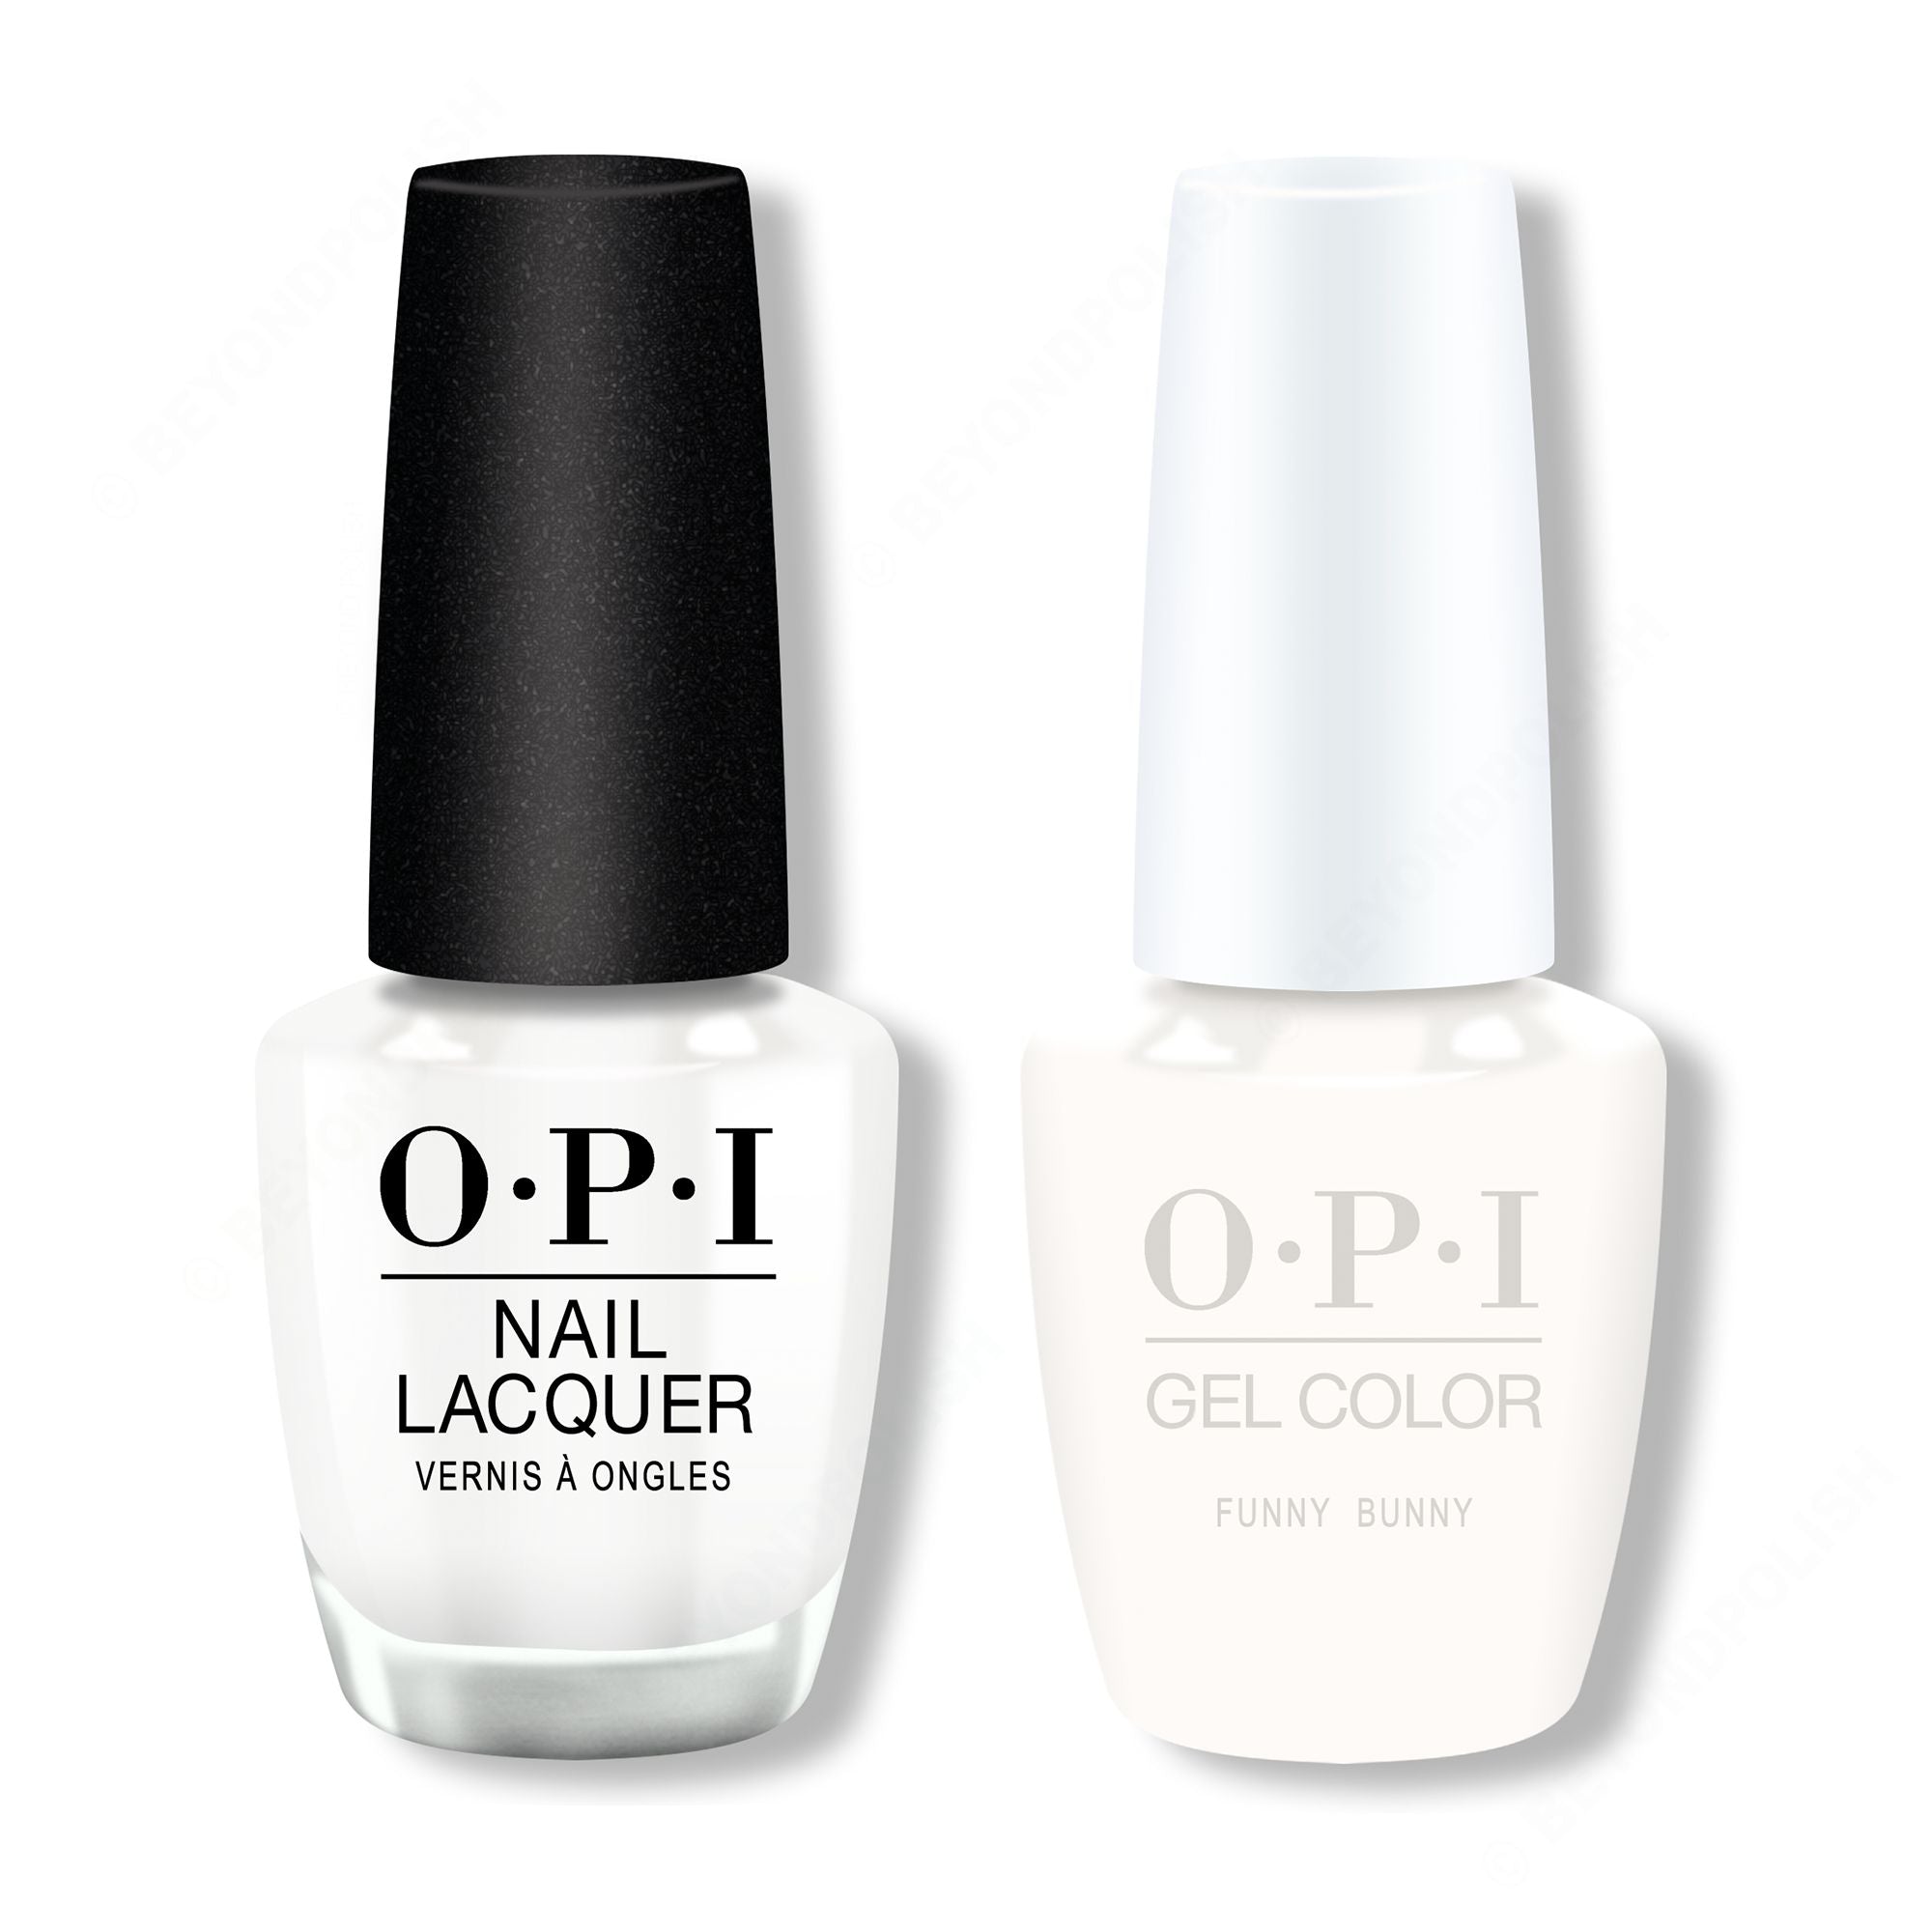 OPI - Gel & Lacquer Combo - Funny Bunny - Gel & Lacquer Polish at Beyond Polish